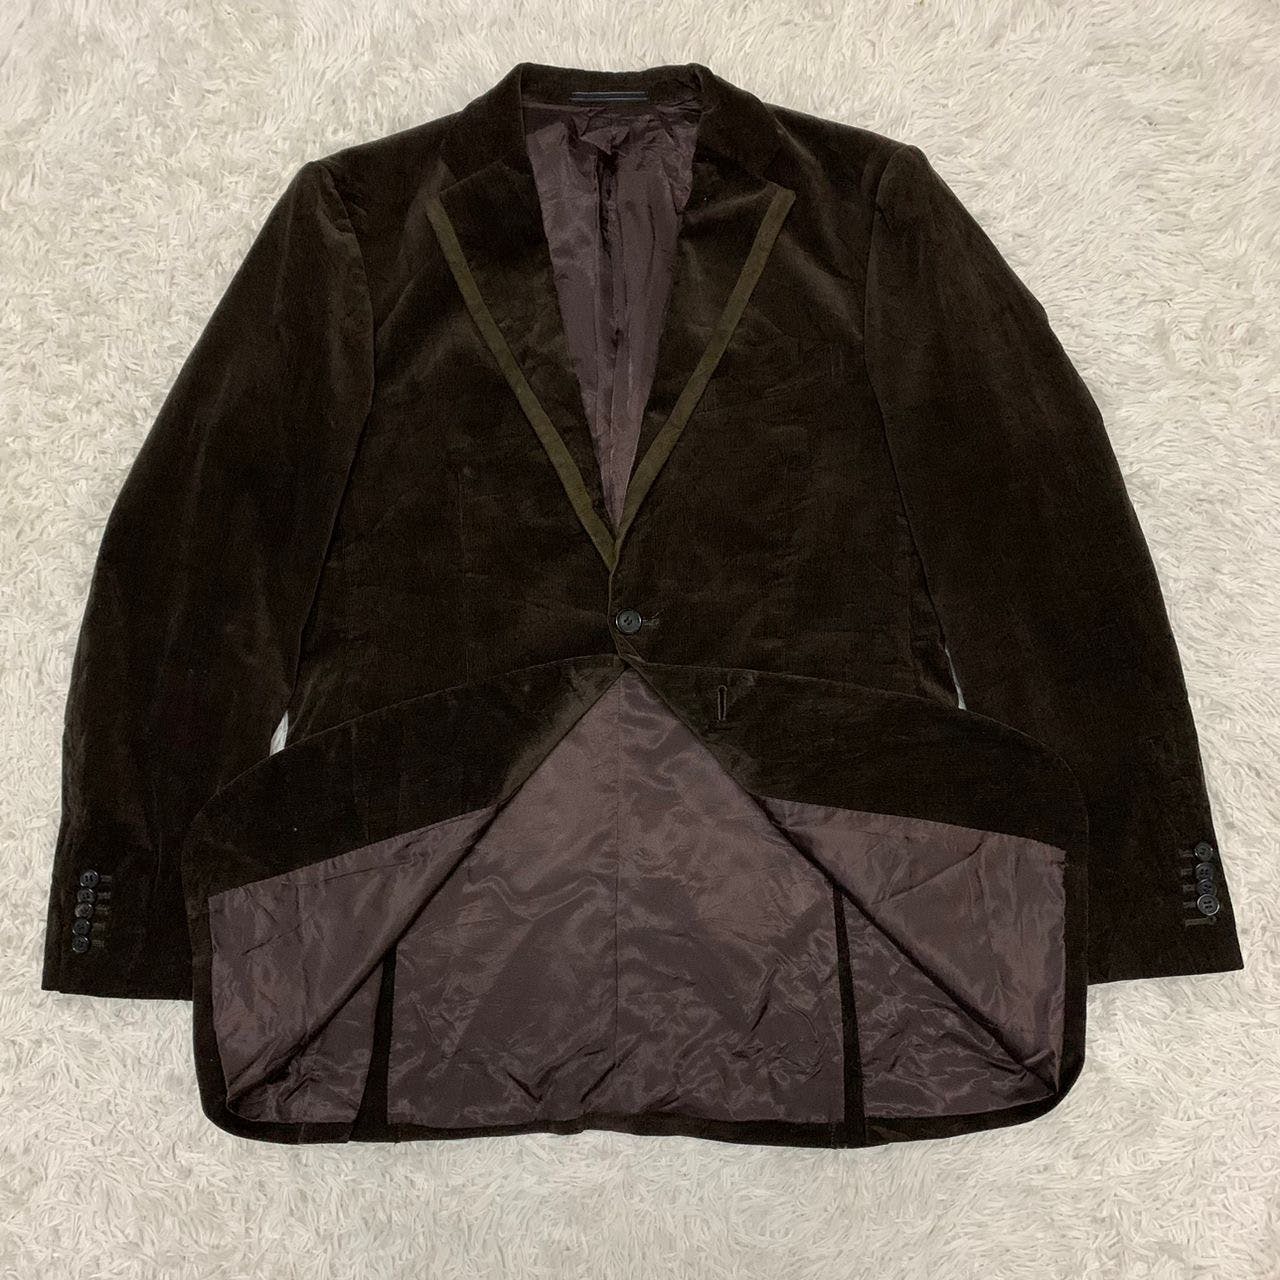 EZ by Zegna Jacket Coat Made in Japan - 2